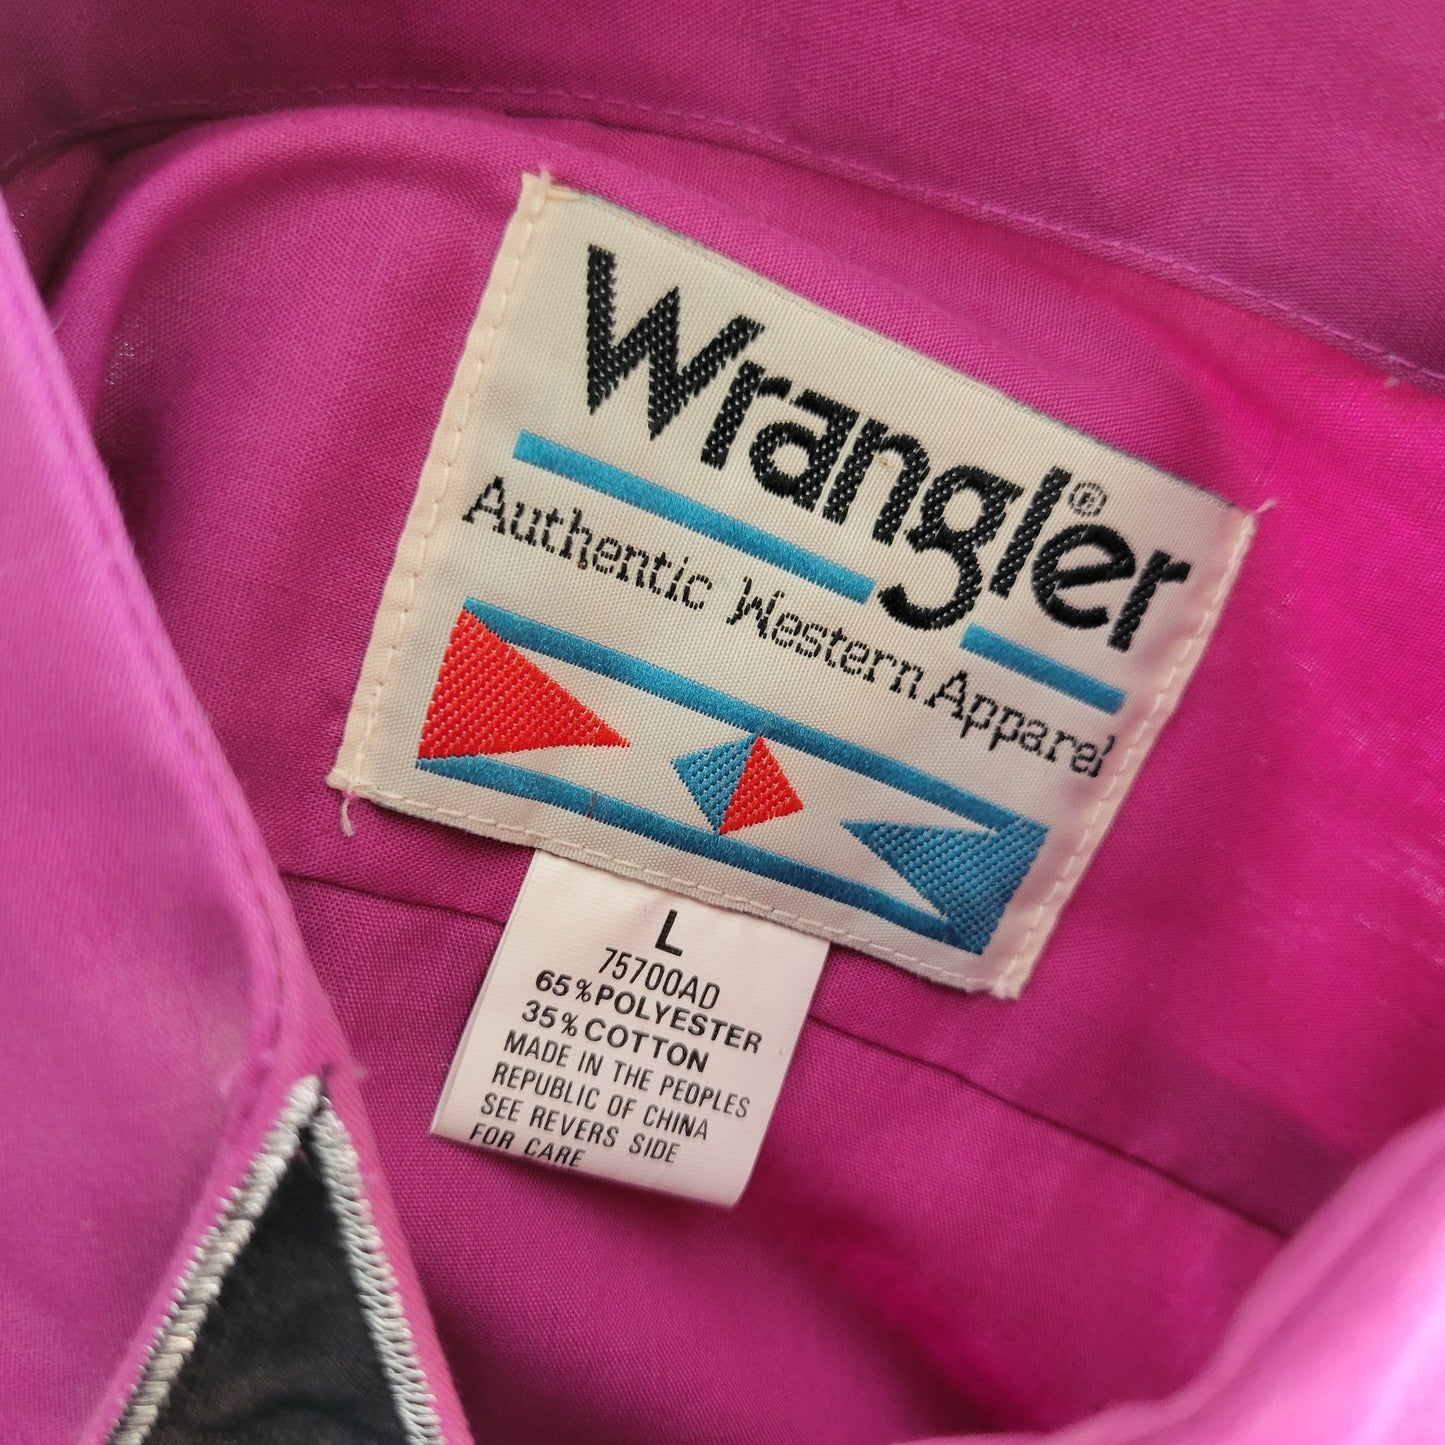 Vintage Authentic Wrangler Pink Top with Beading and Appliques - large